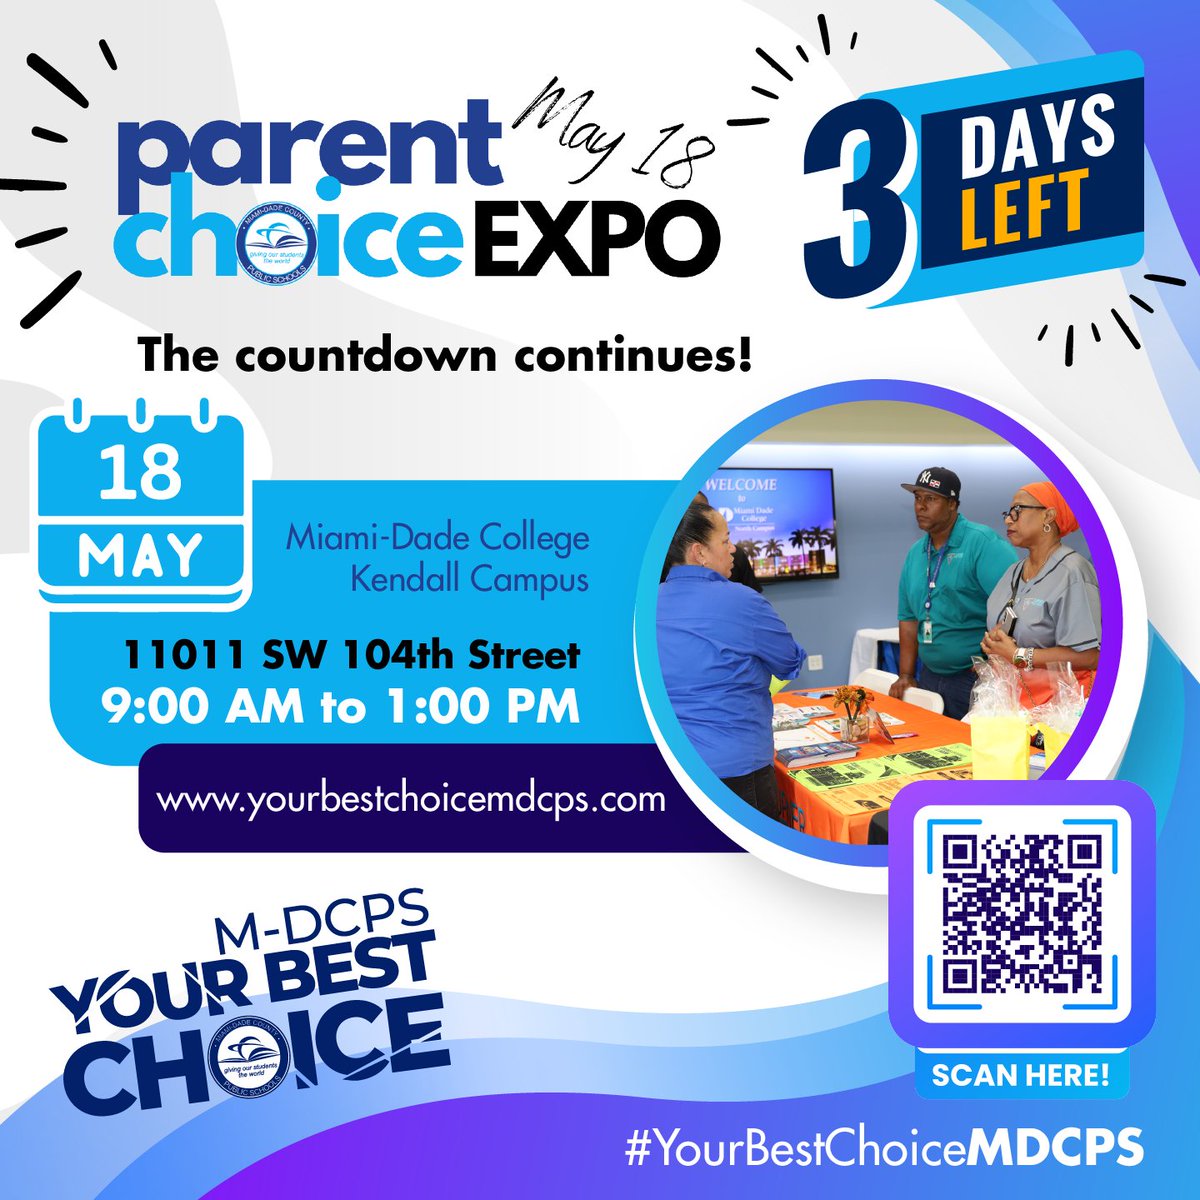 The countdown continues! Just three more days until the Parent Choice Expo at @MDCollege Kendall Campus. Join us this Saturday to explore @MDCPS' exceptional academic programs and resources. Don't miss out! For more info, visit: yourbestchoicemdcps.com #YourBestChoiceMDCPS